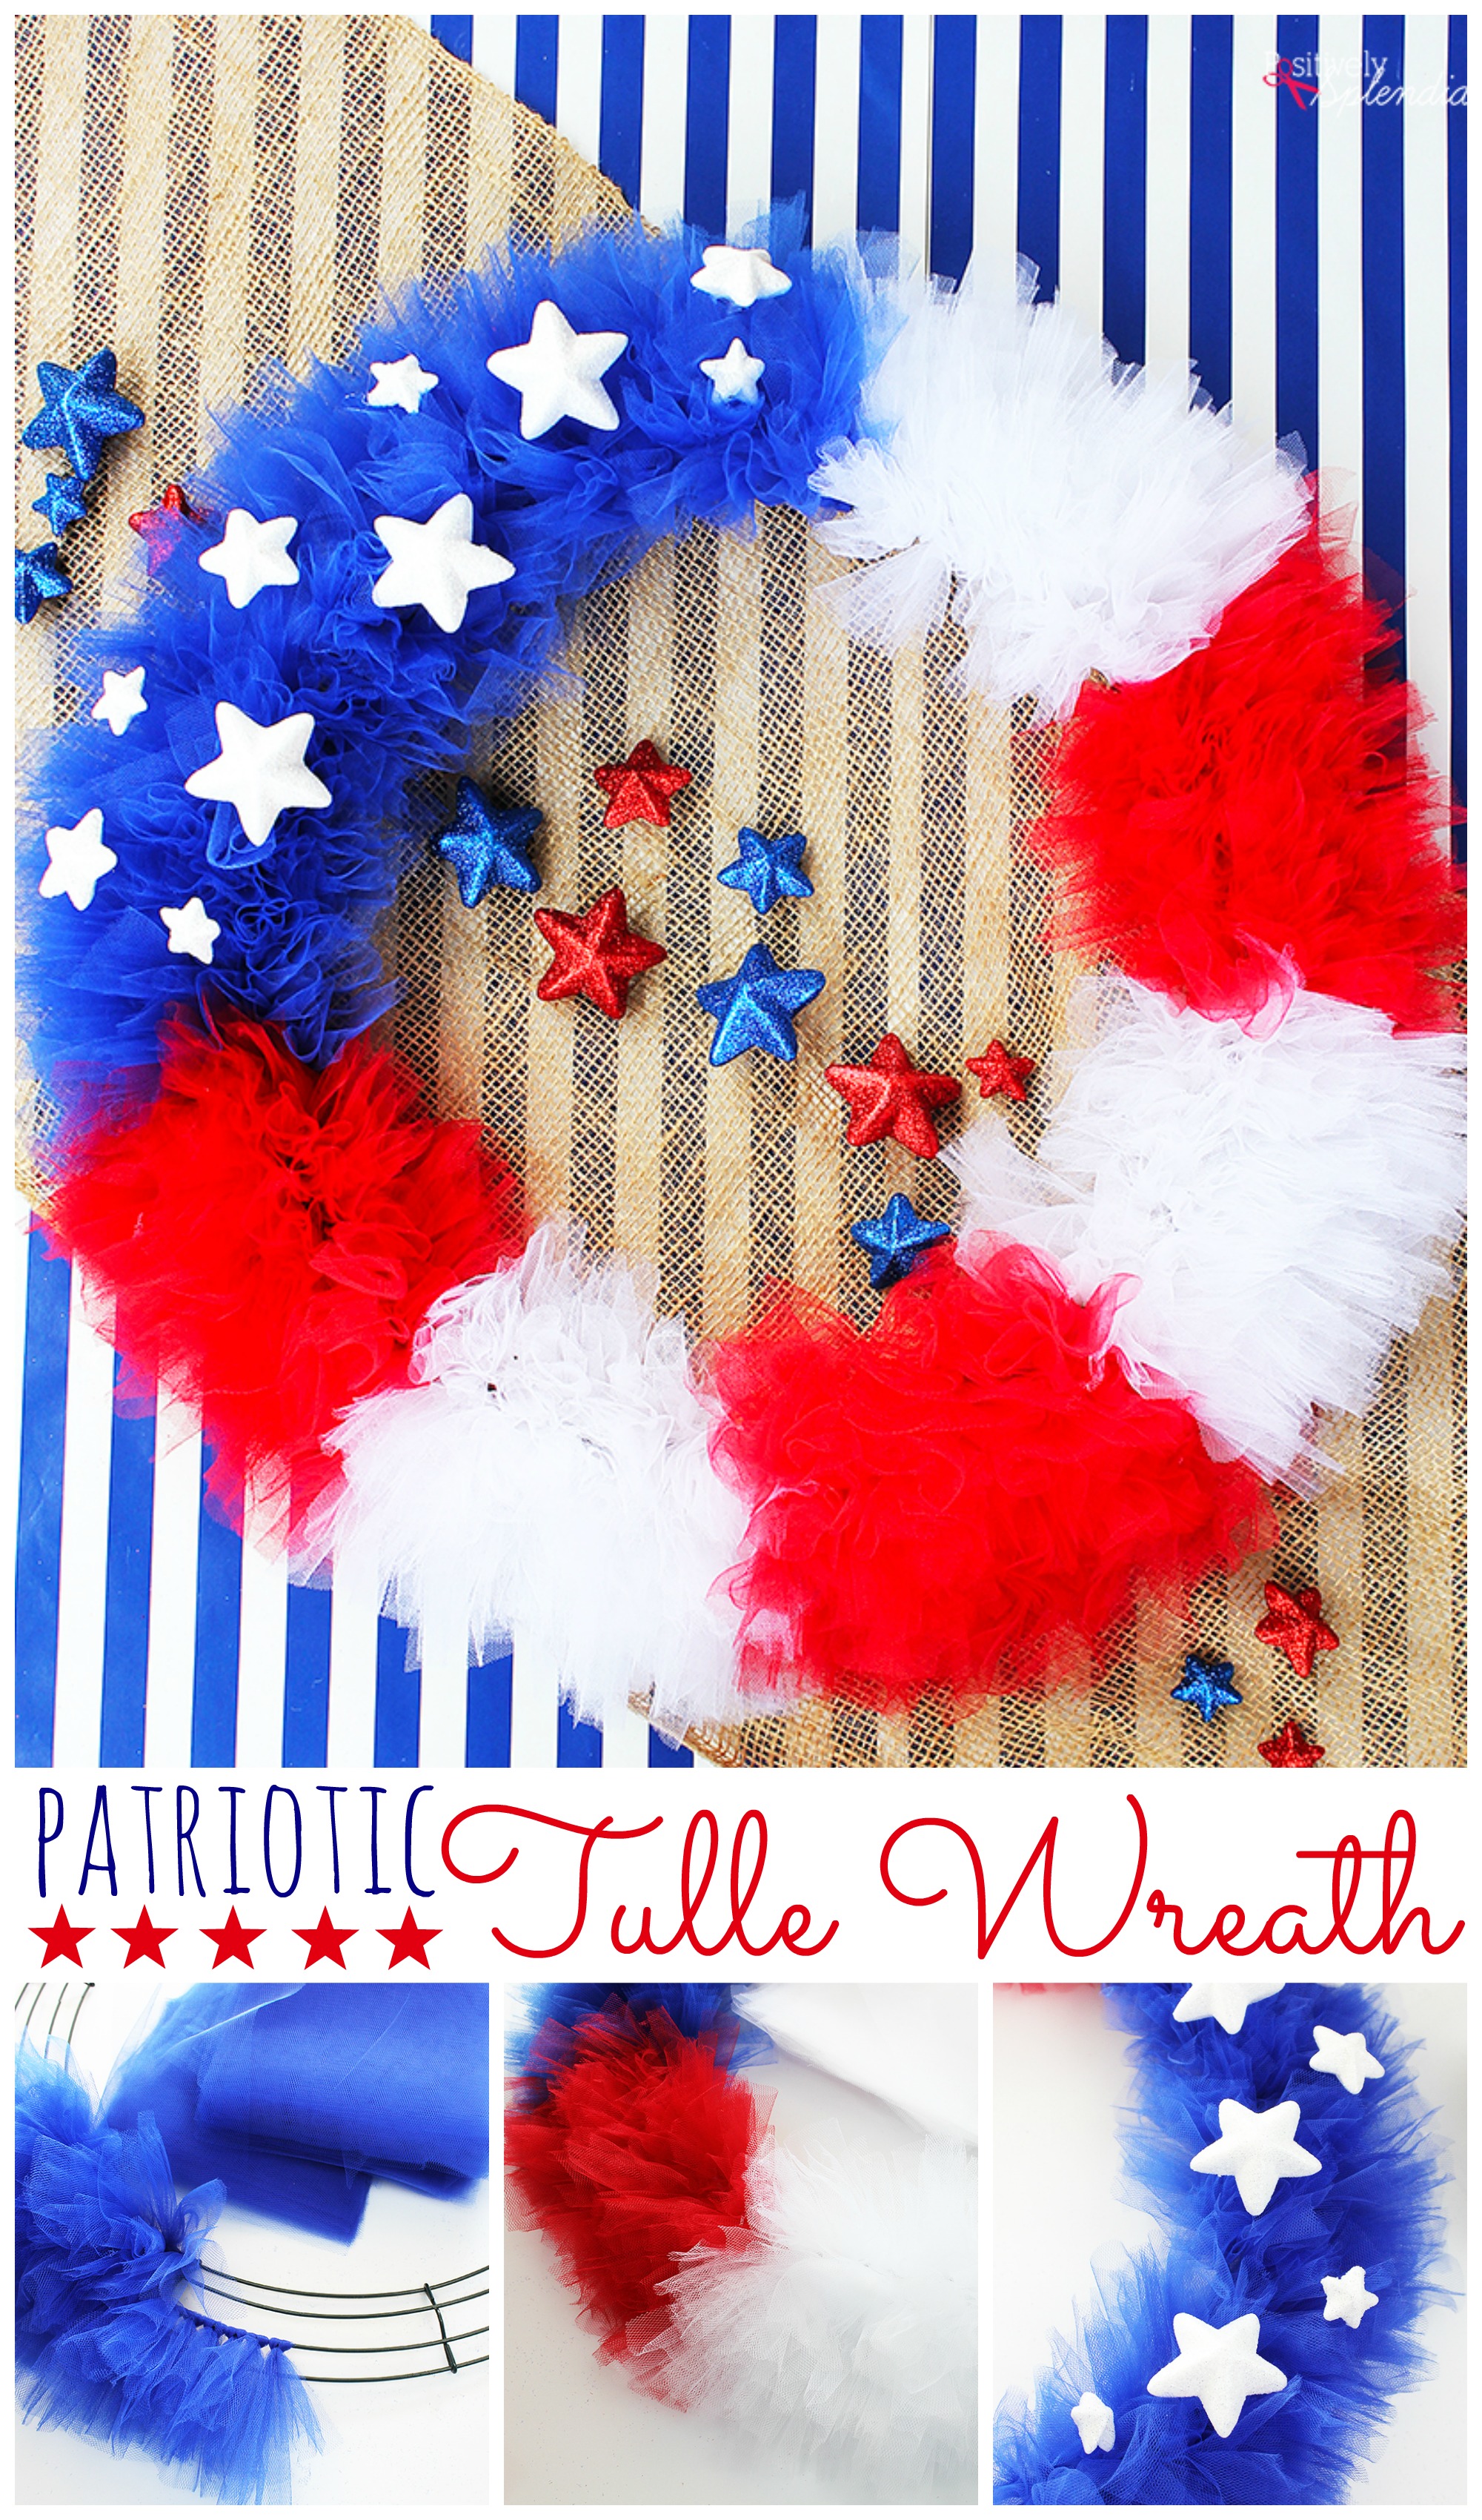 Ring Wreath July 4th Home Decorations Wreath For Patriotic